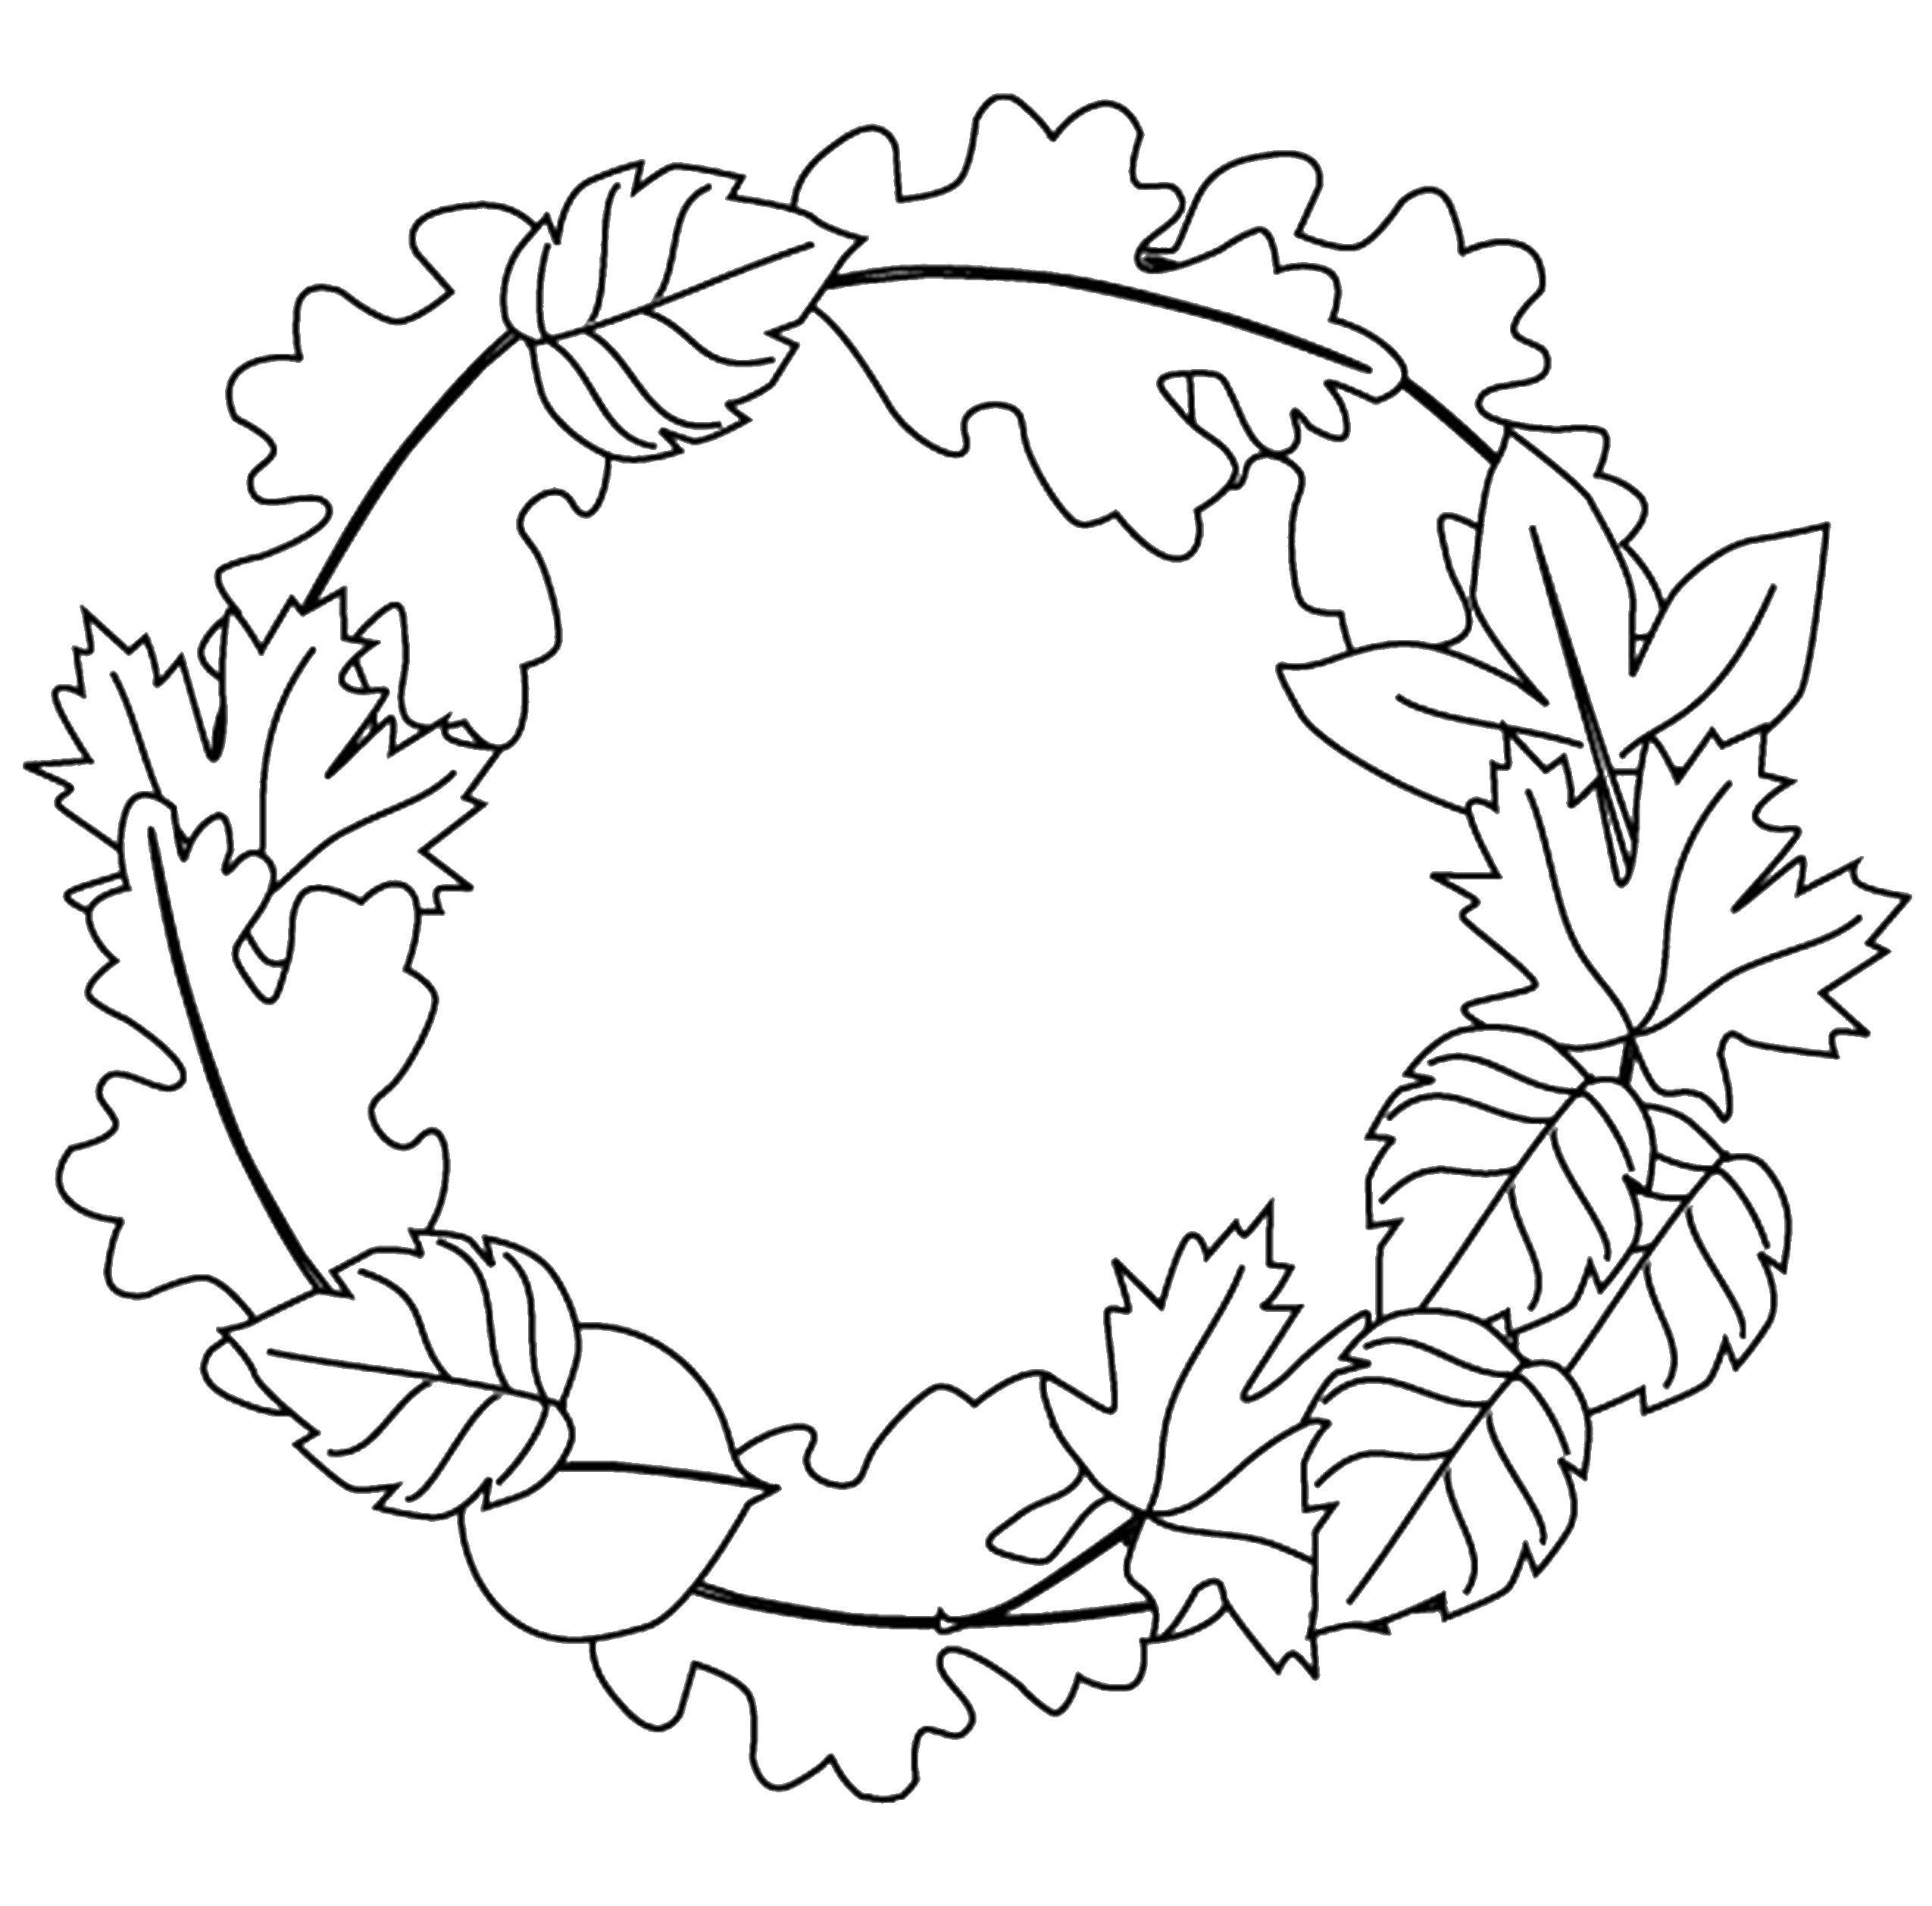 Coloring A wreath of leaves. Category Autumn. Tags:  leaves, autumn.